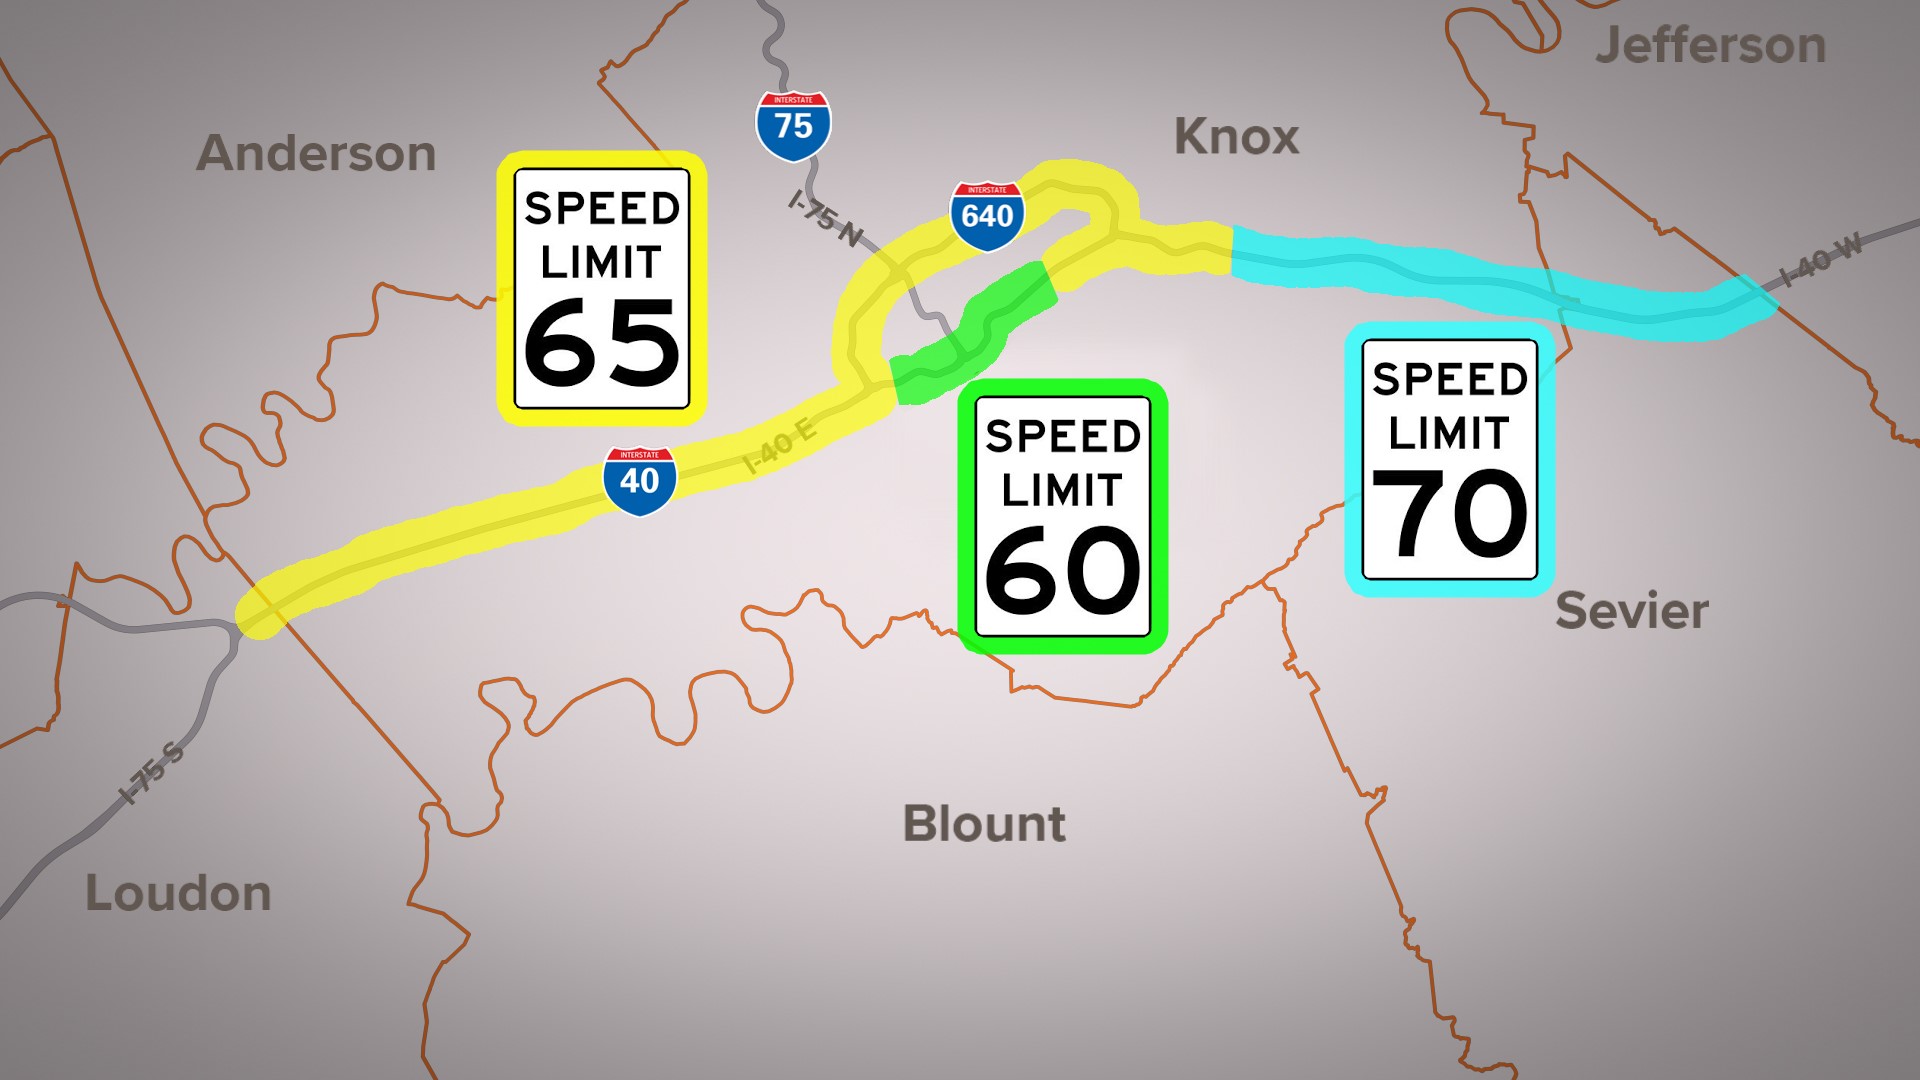 TDOT raised the speed limit from 55 to 65 miles an hour.